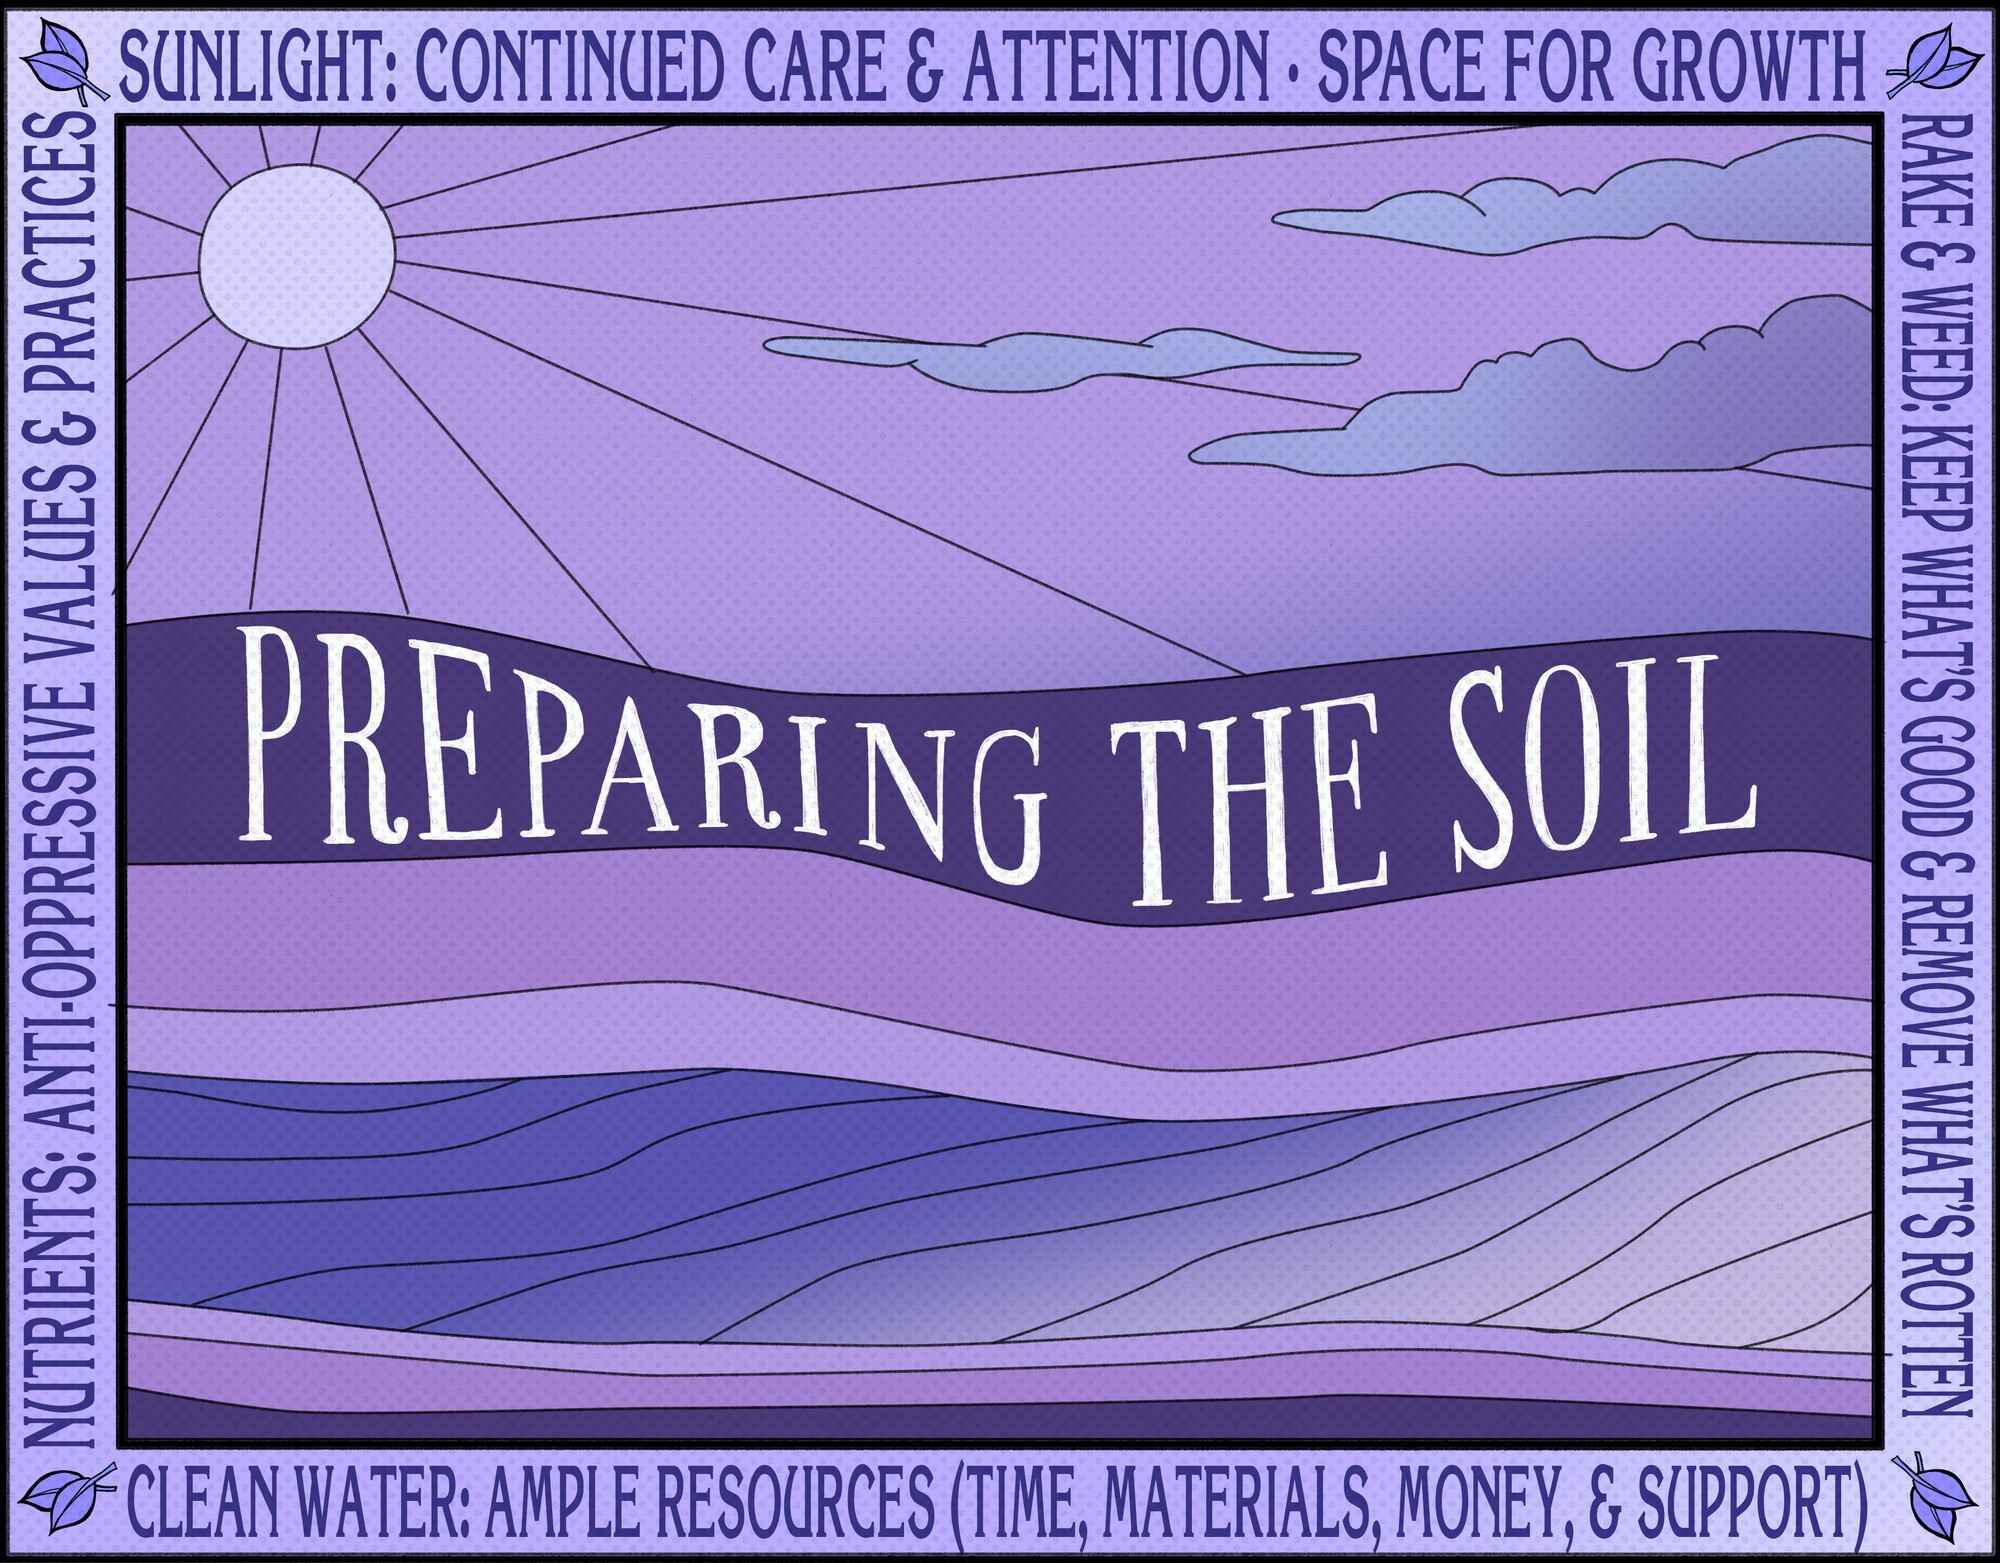 A purple image with the words "Preparing the Soil" against a sunny background and the words "sunlight," "rake & weed," "clean water" and "nutrients" on the margins.